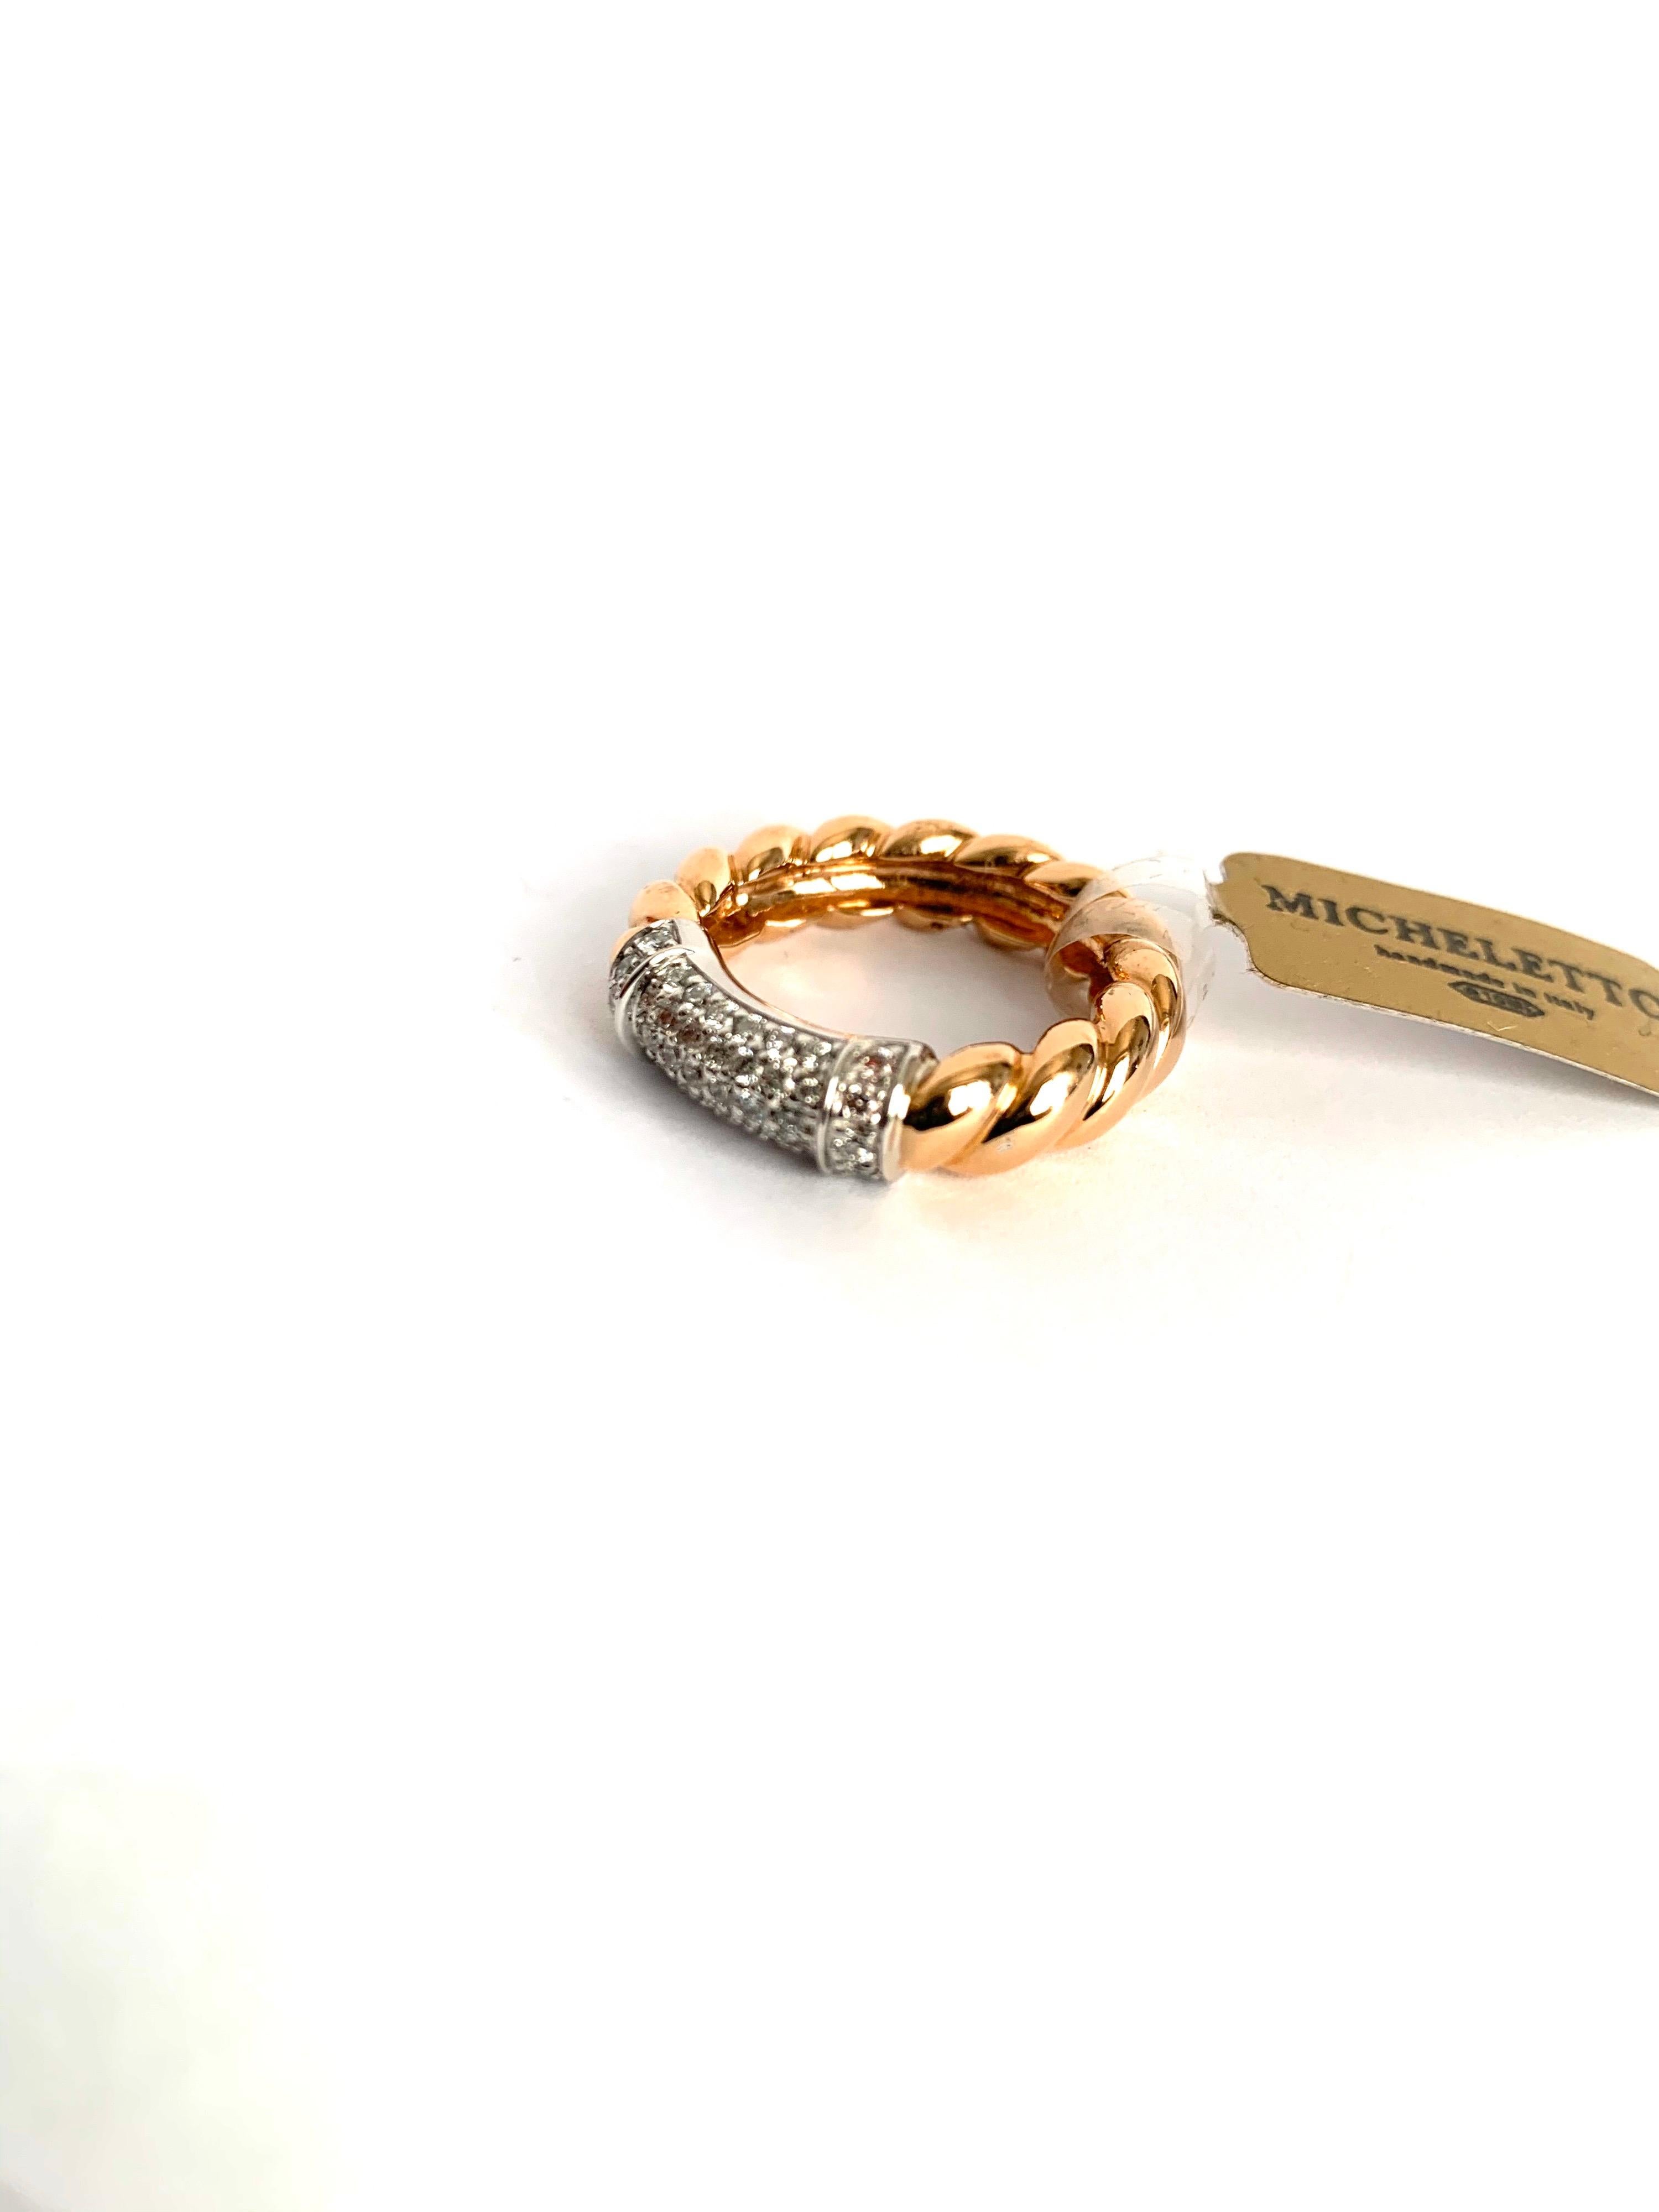 Rope ring in 18 kt  rose gold and white diamonds 
This is a traditional collection in Micheletto 

the total weight of the gold is  gr 9.80
the total weight of the white diamonds is ct 0.60 - color GH clarity VVS1

STAMP: 10 MI ITALY 750
US SIZE 6